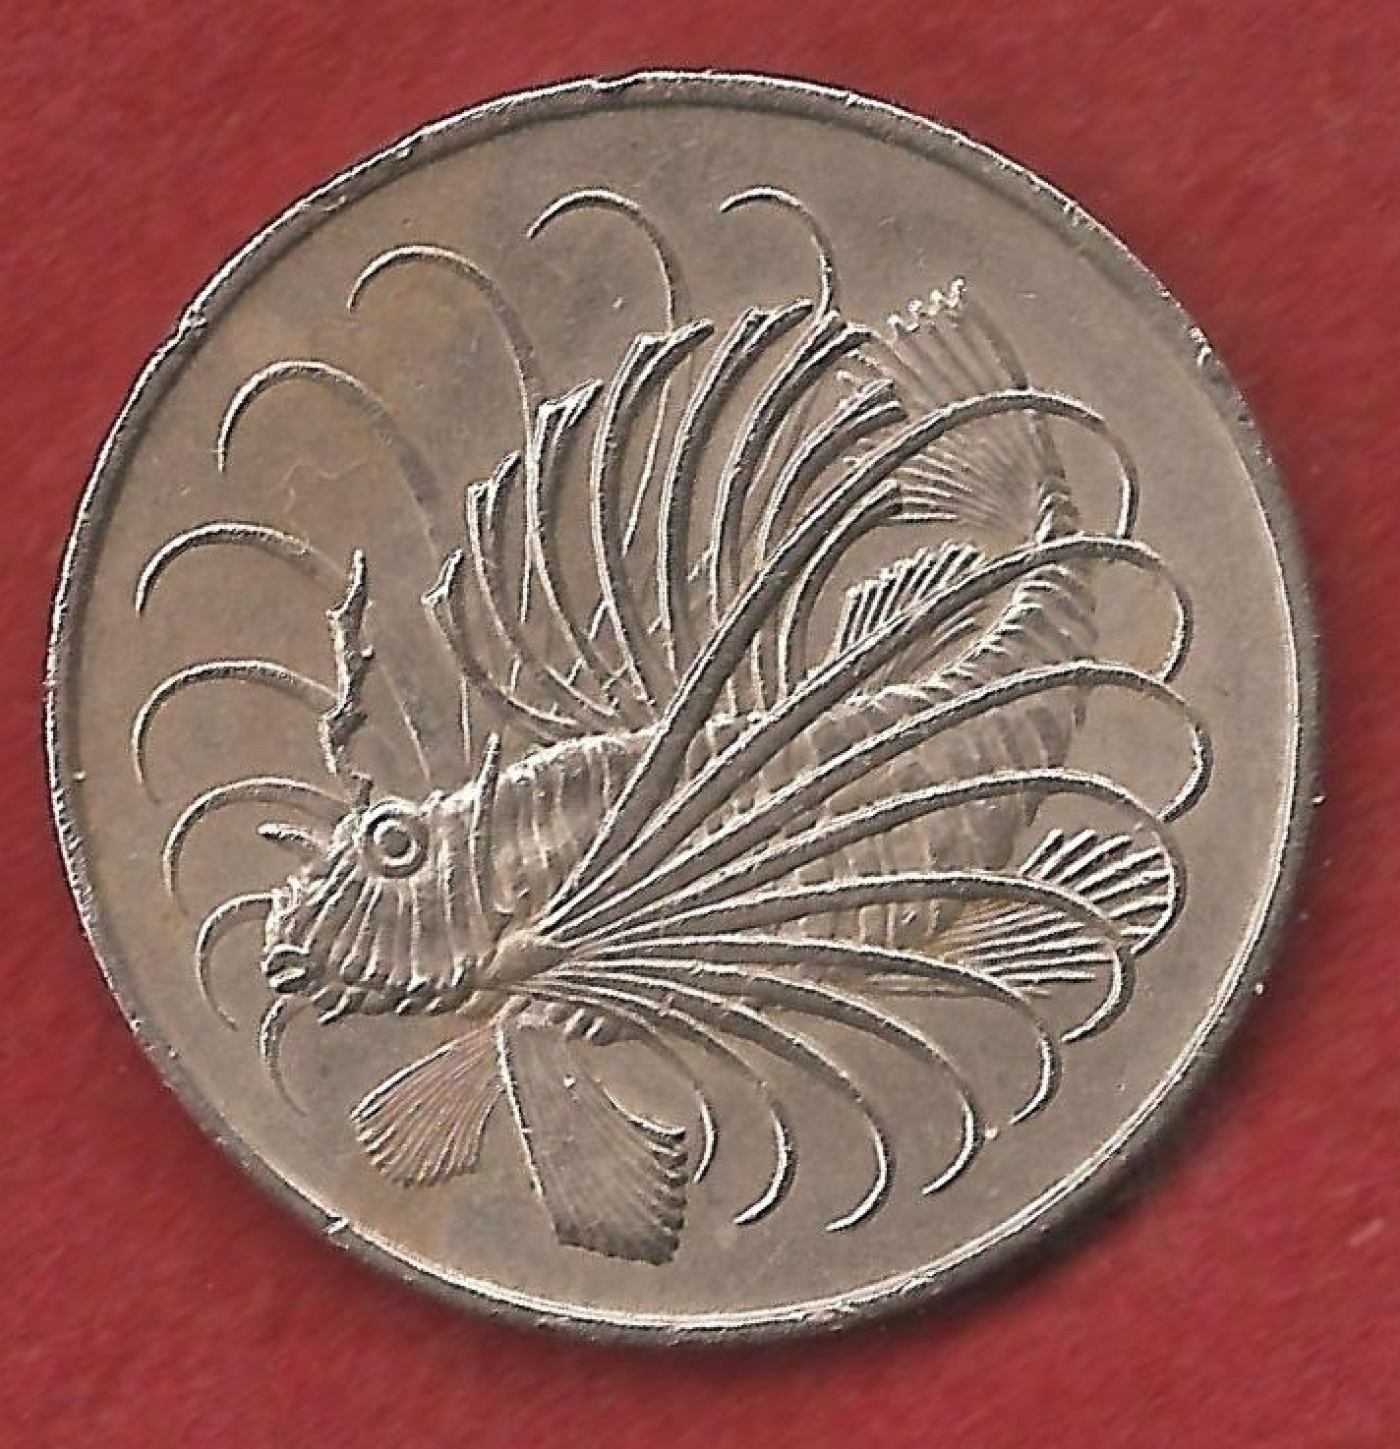 Singapore 50 Cent Coin Dated 1967 Ref 105 